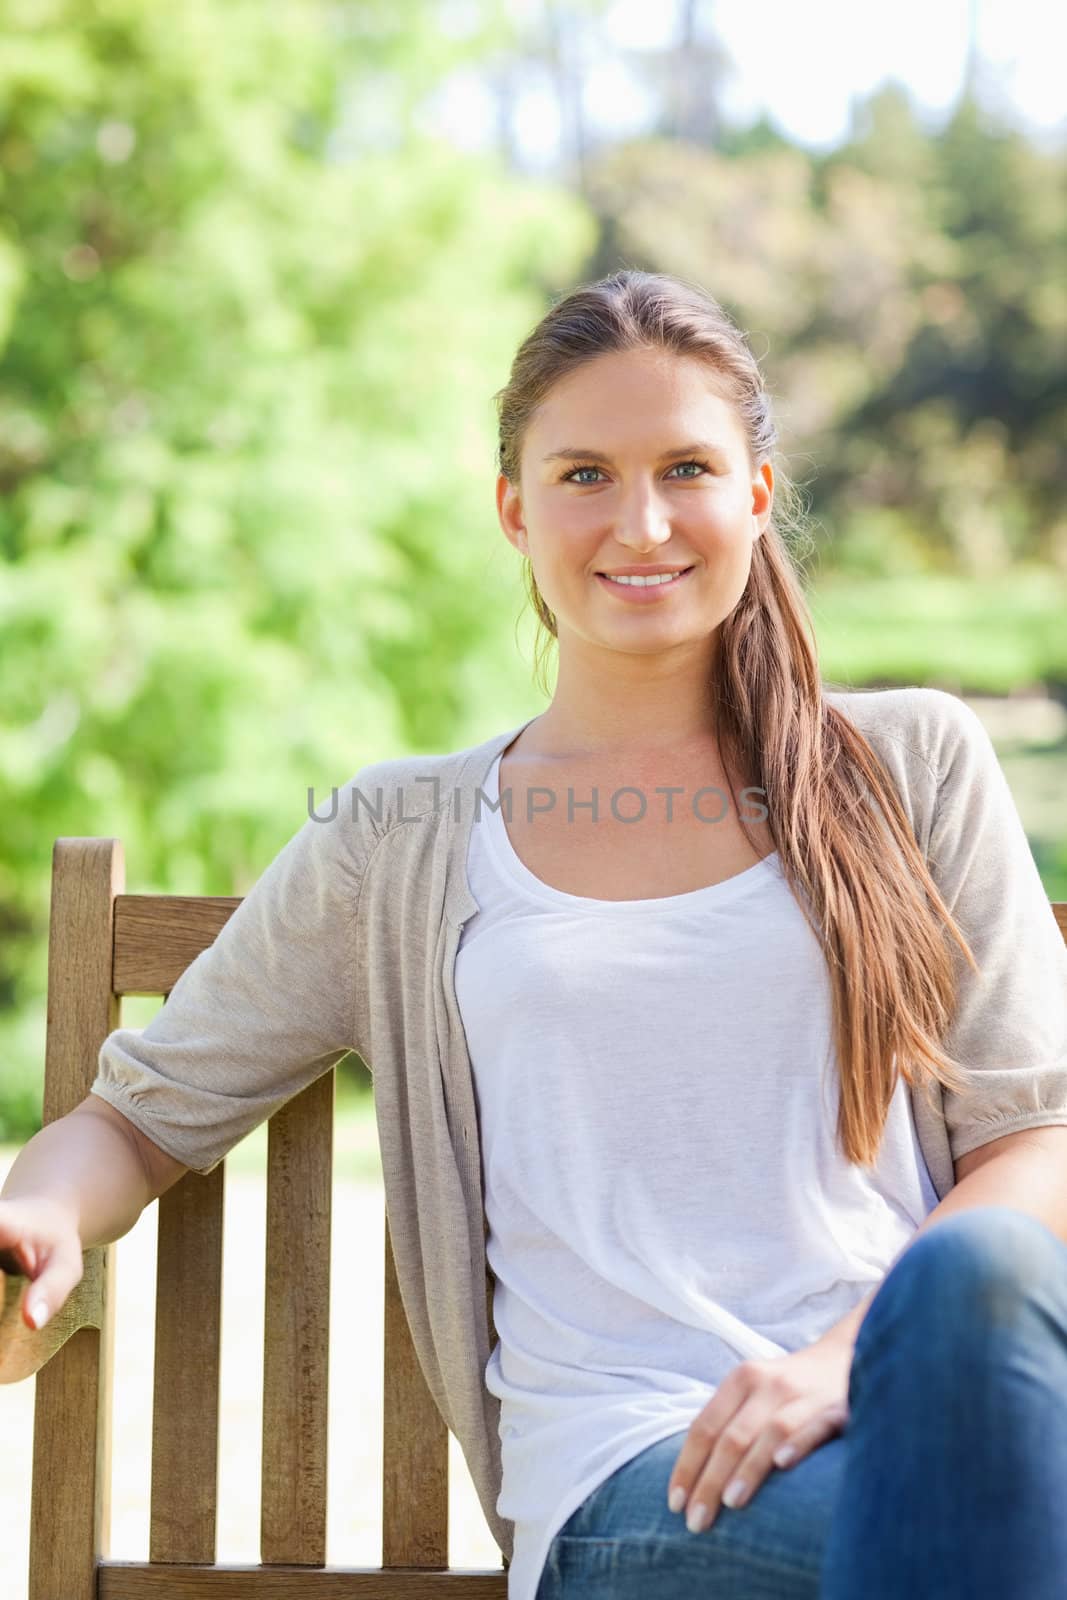 Smiling woman enjoying her day on a park bench by Wavebreakmedia